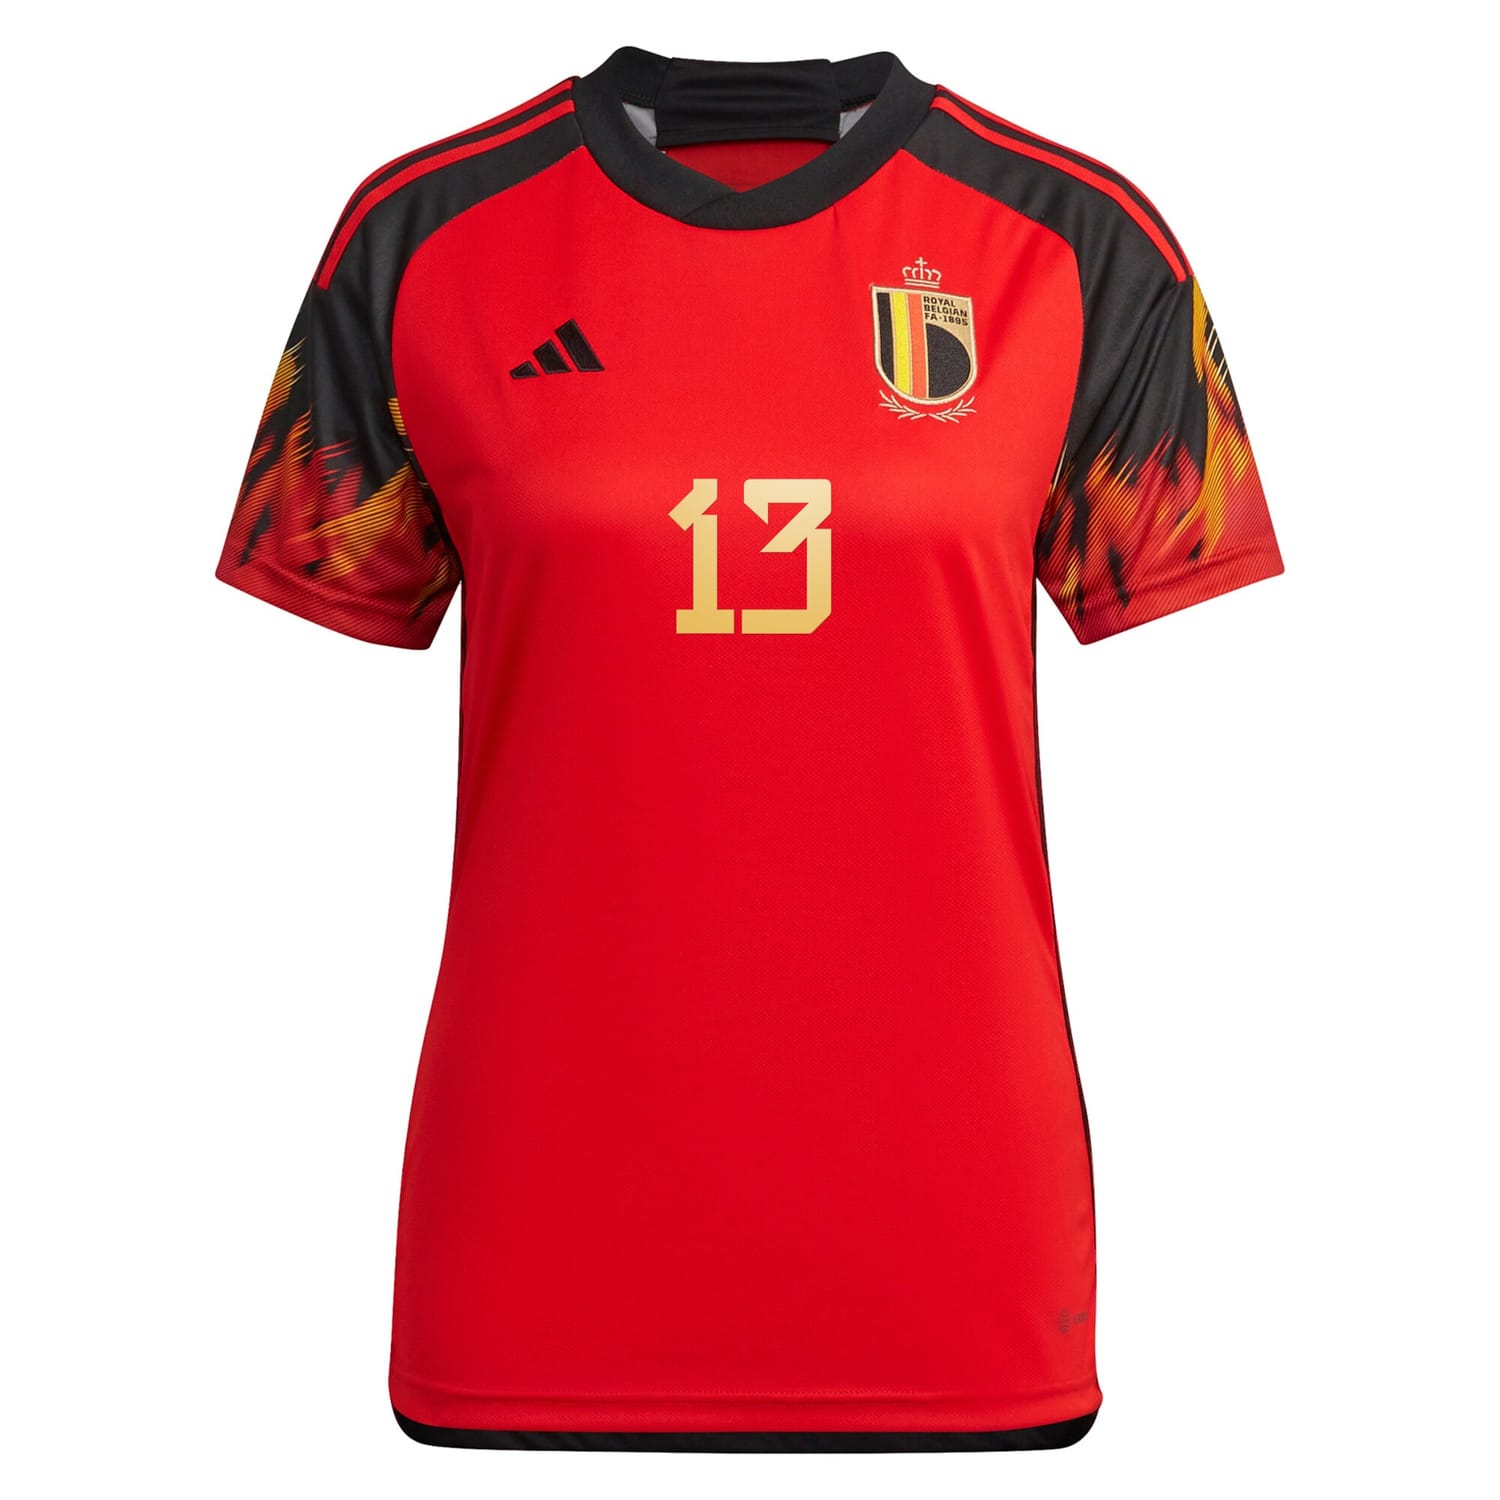 Belgium National Team Home Jersey Shirt 2022 player Elena Dhont 13 printing for Women